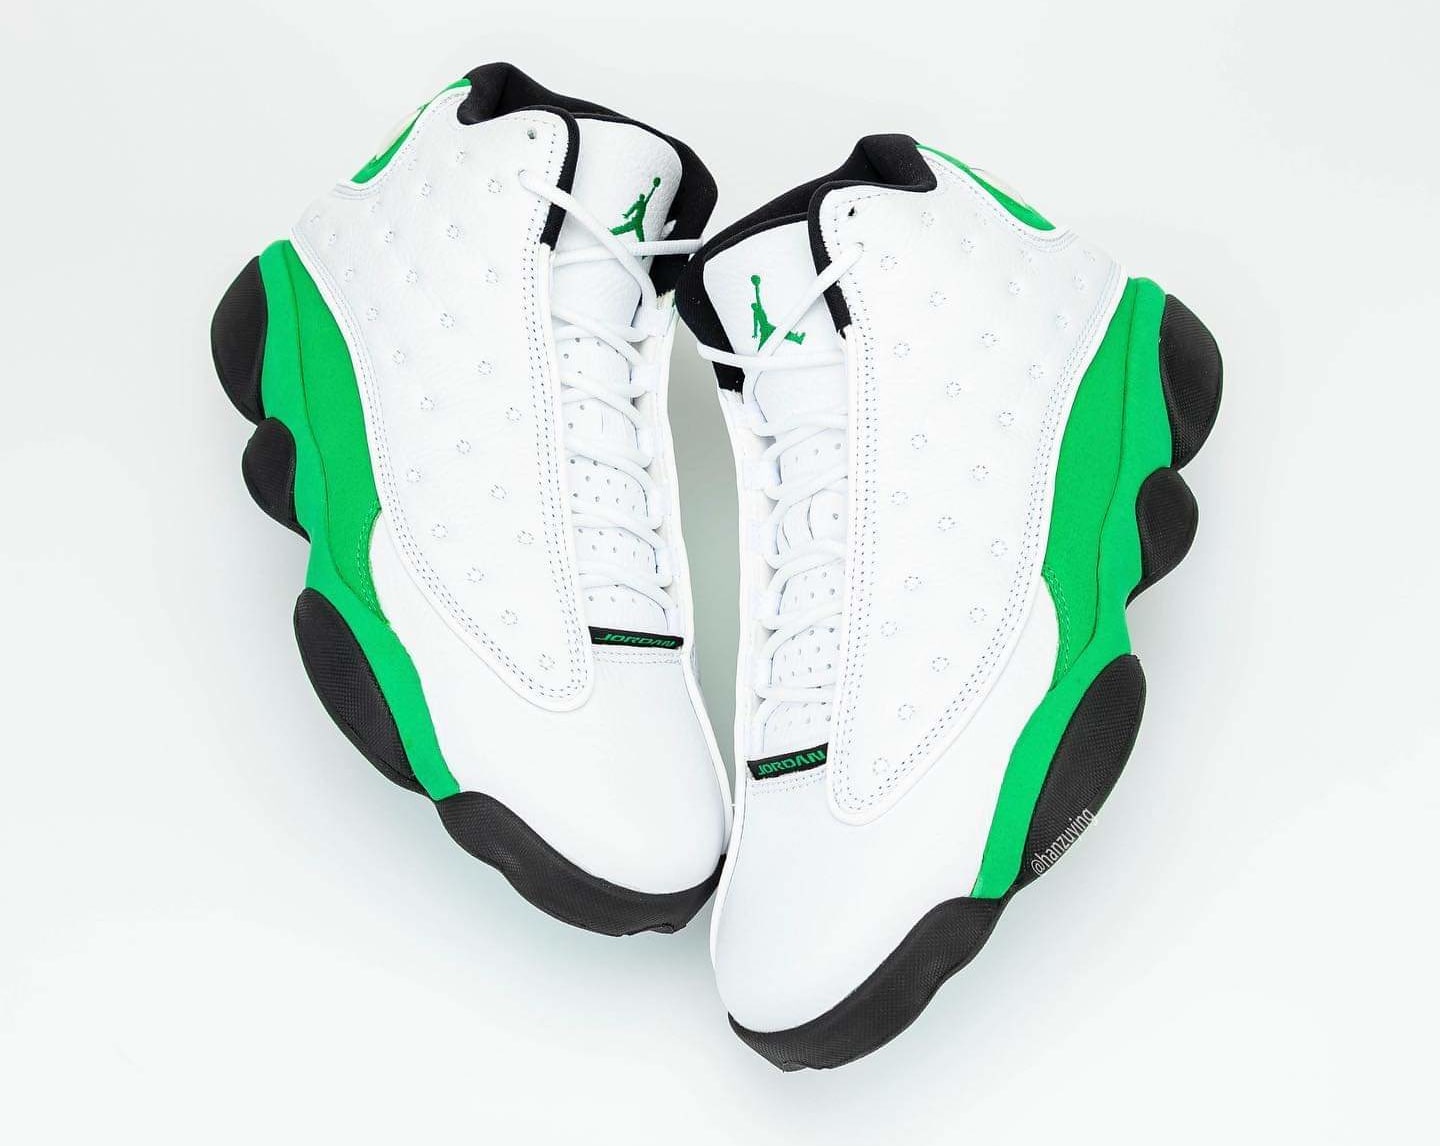 green and white jordans 13 release date